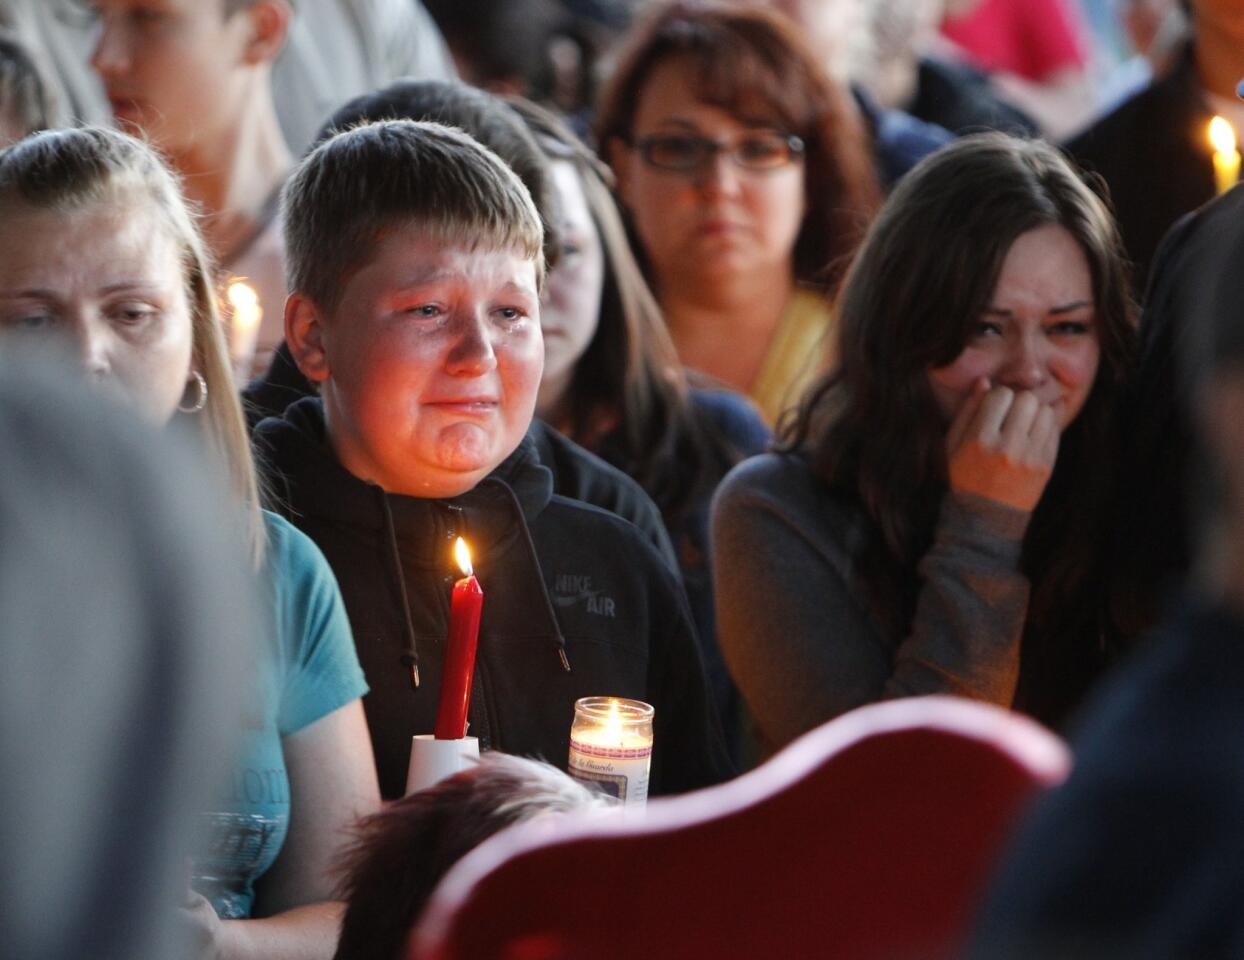 Supporters attend a candlelight vigil after a shooting at Reynolds High School in Troutdale, Oregon June 10, 2014. A gunman walked into the school and fatally shot a student before authorities found him dead a short time later, a day before students were due to finish classes and break for summer vacation.